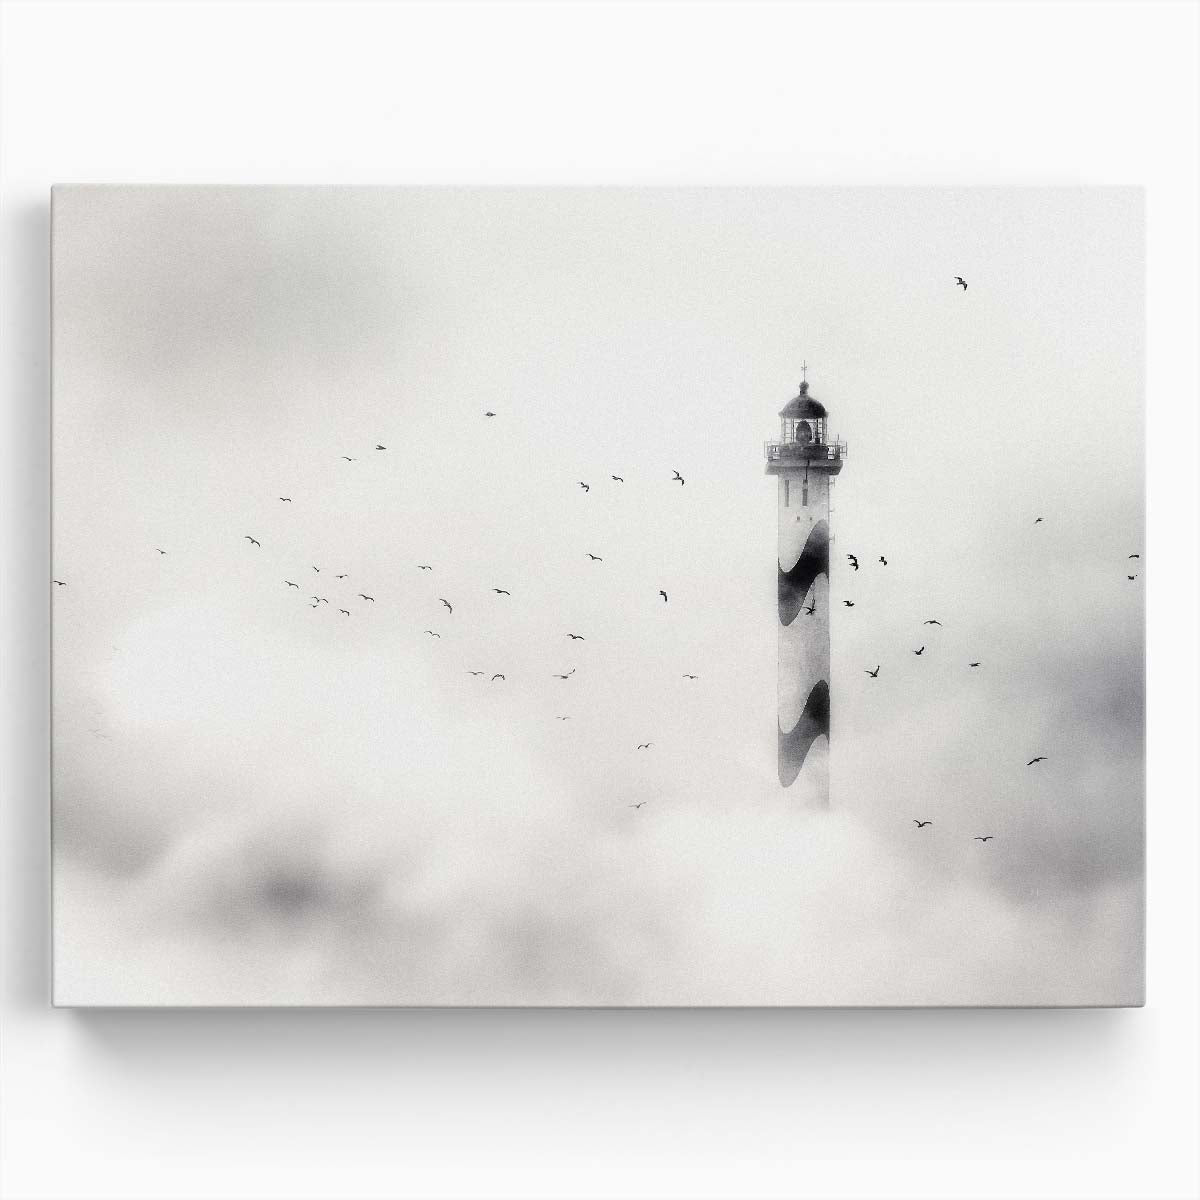 Foggy Ostend Lighthouse & Birds Monochrome Seascape Wall Art by Luxuriance Designs. Made in USA.